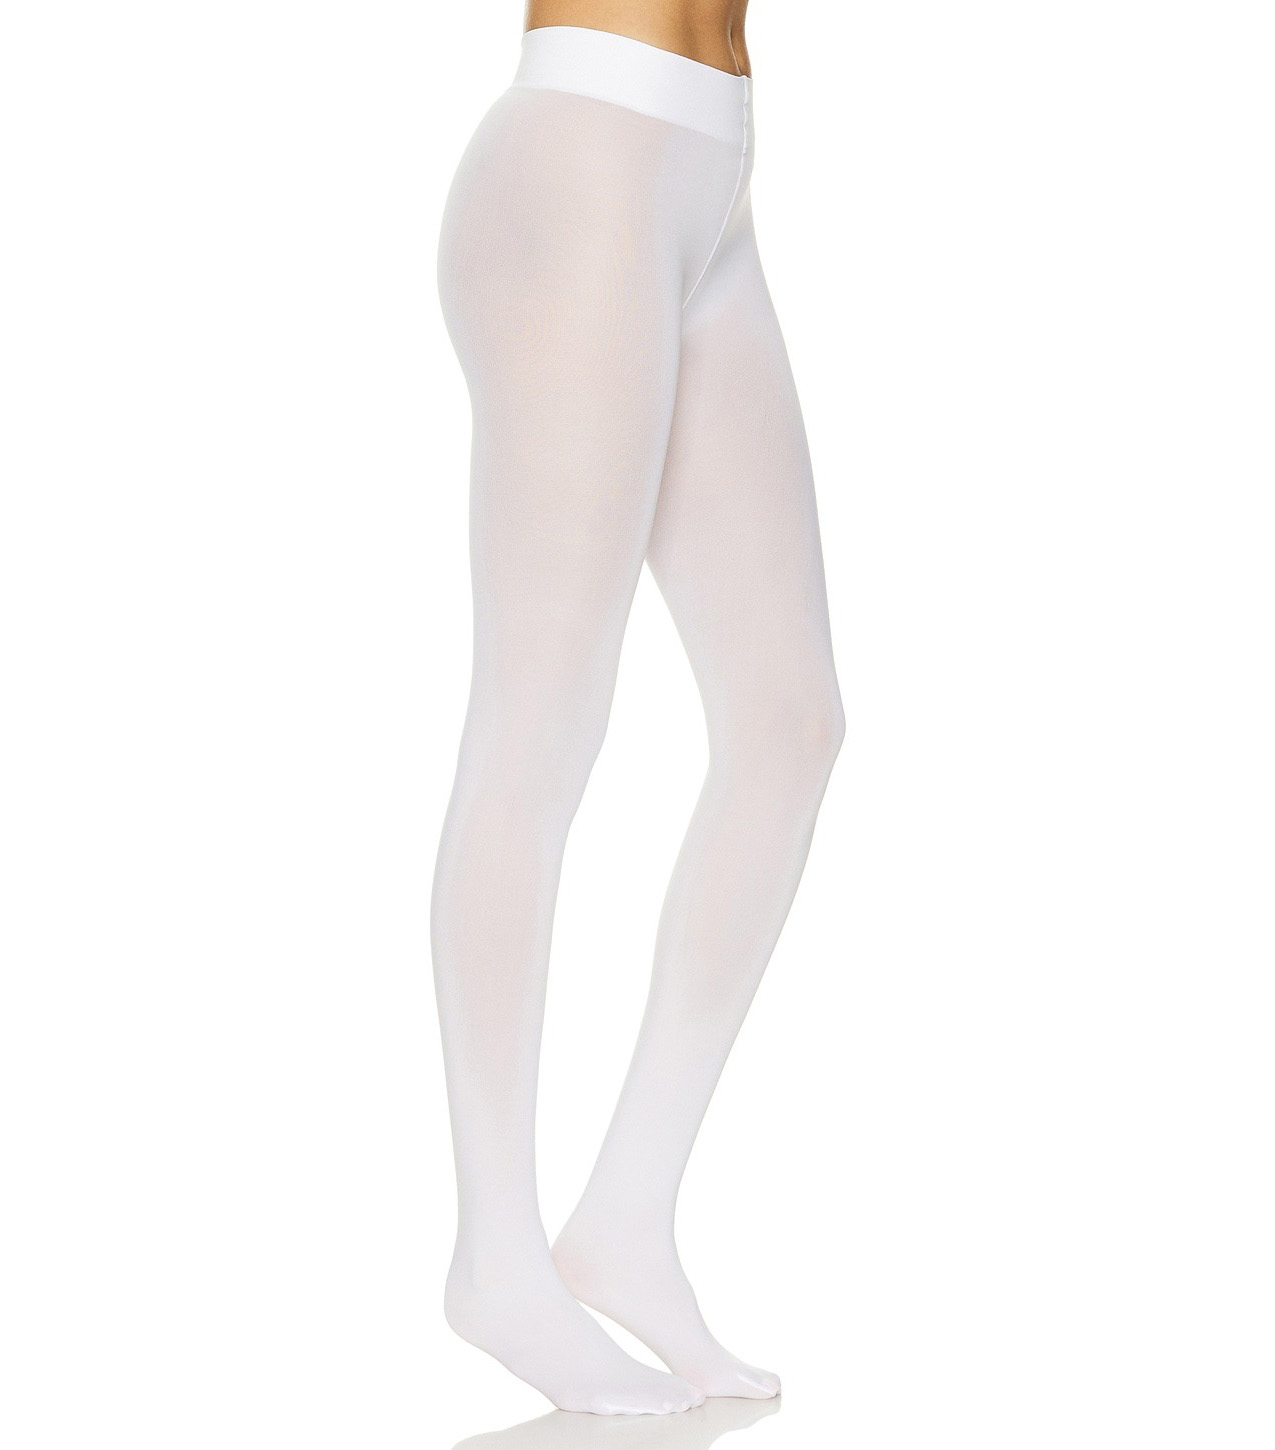 Wolford white tights